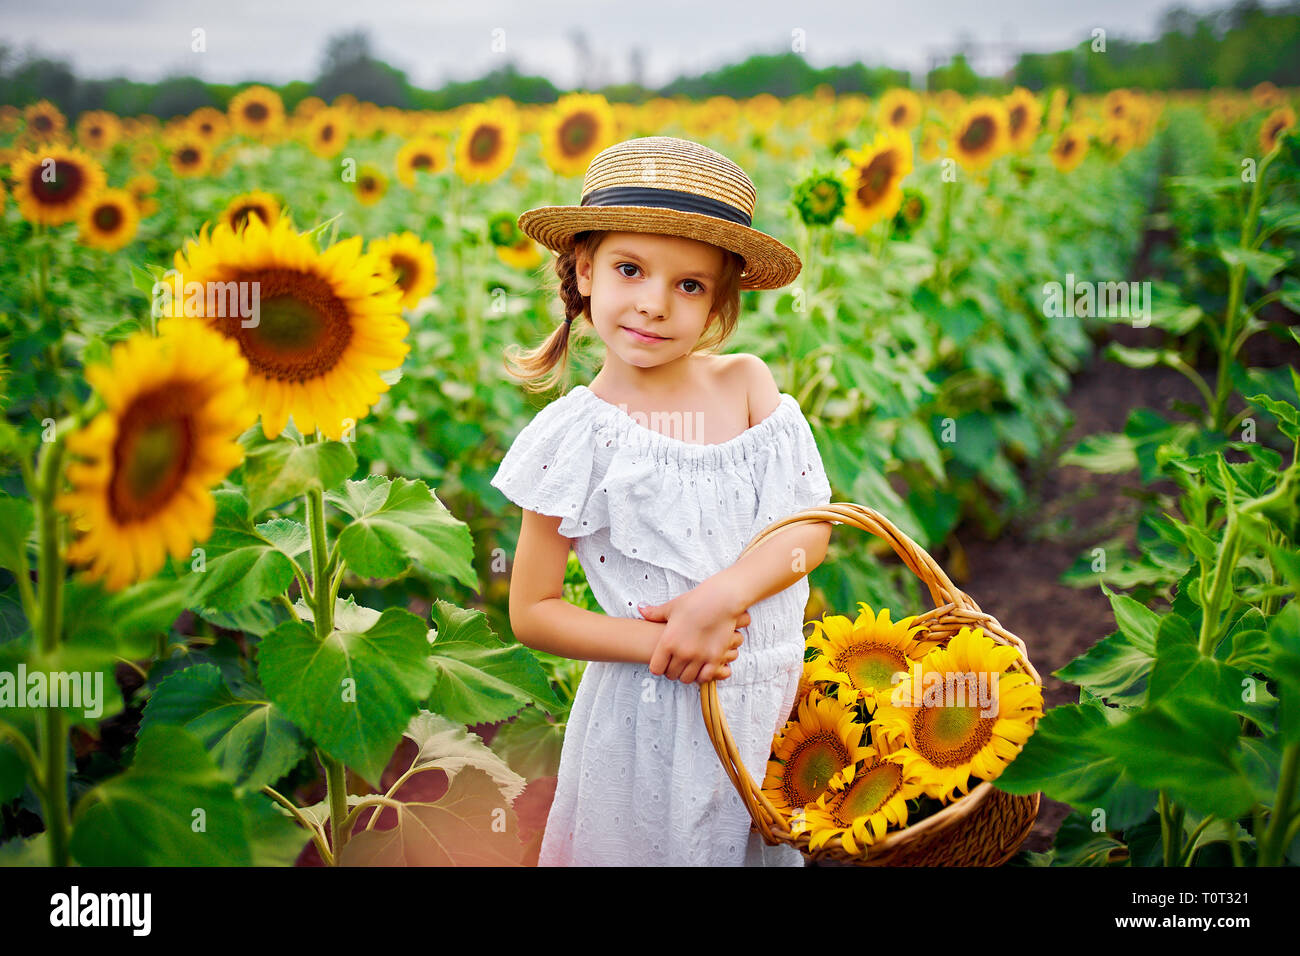 Portrait happy child girl in white dress, straw hat with a basket of sunflowers smiling and looking at camera. Sunny light playing on field. Family outdoor lifestyle. Summer cozy mood. Stock Photo